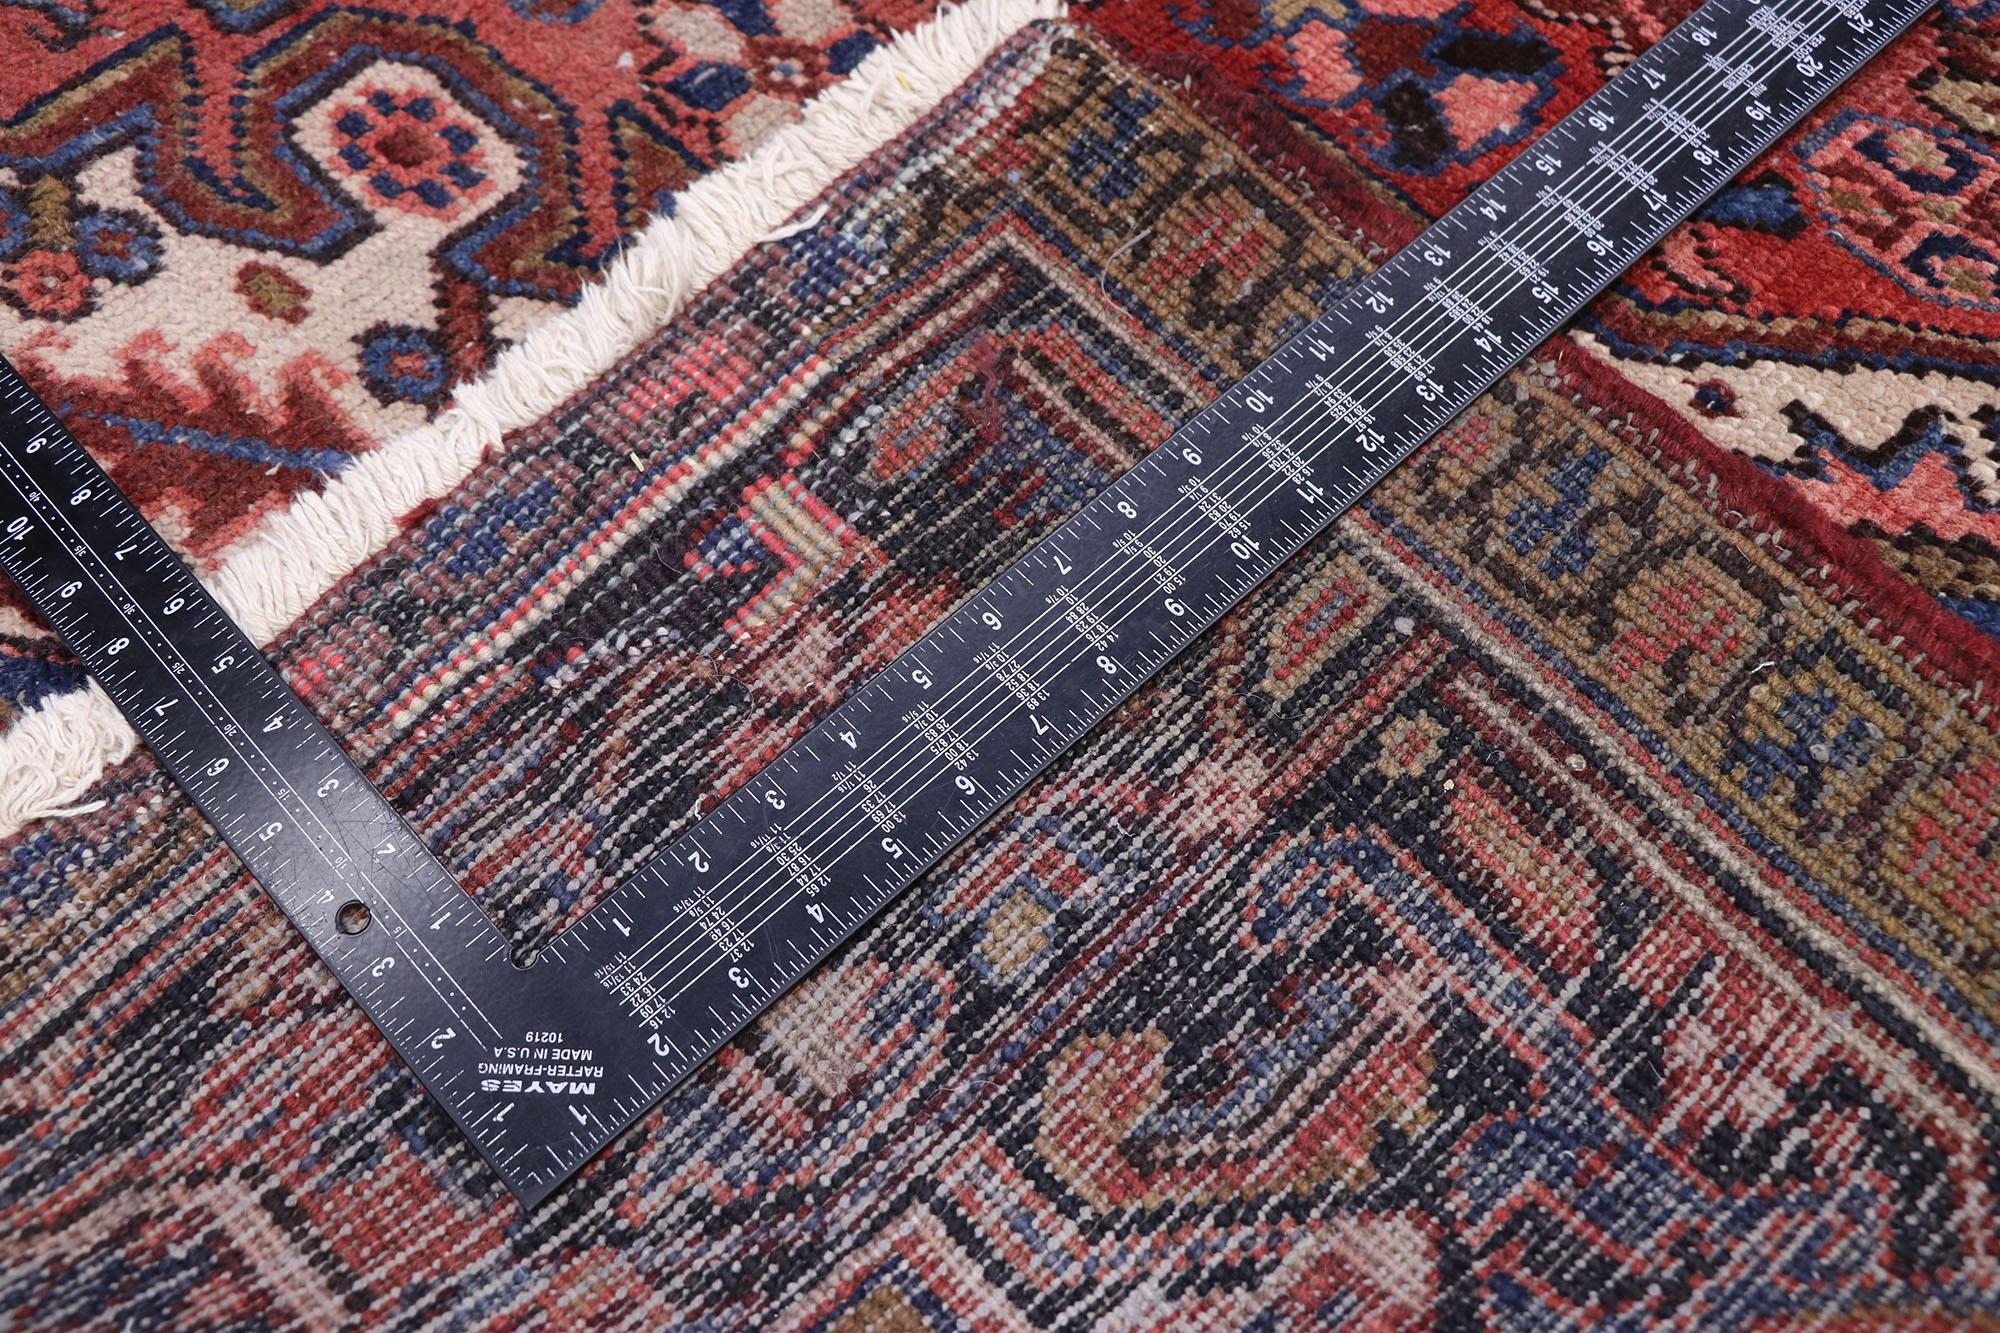 Vintage Heriz Persian Area Rug with Federal and American Colonial Style In Fair Condition For Sale In Dallas, TX